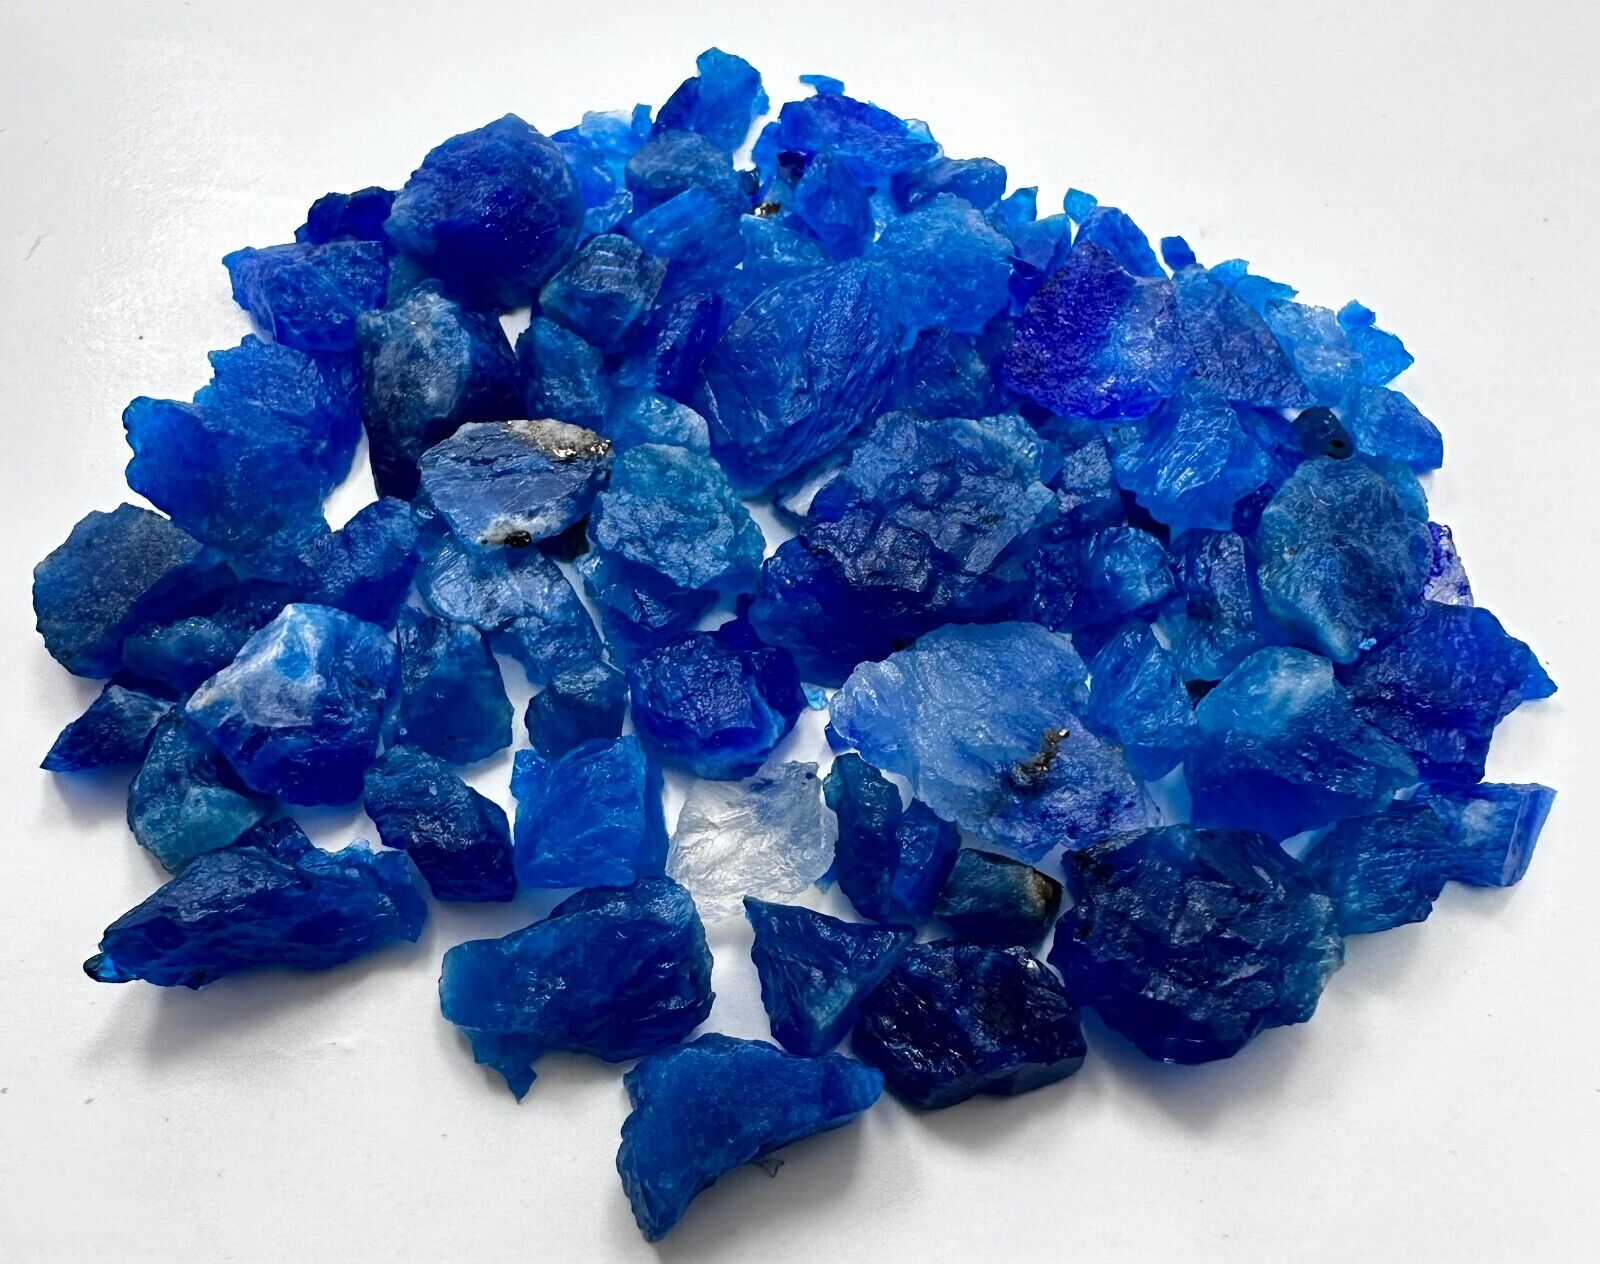 102 Ct Wow  Royal Blue Fluorescent Hauyne Coatate Sodalite Crystals Lot @AFG